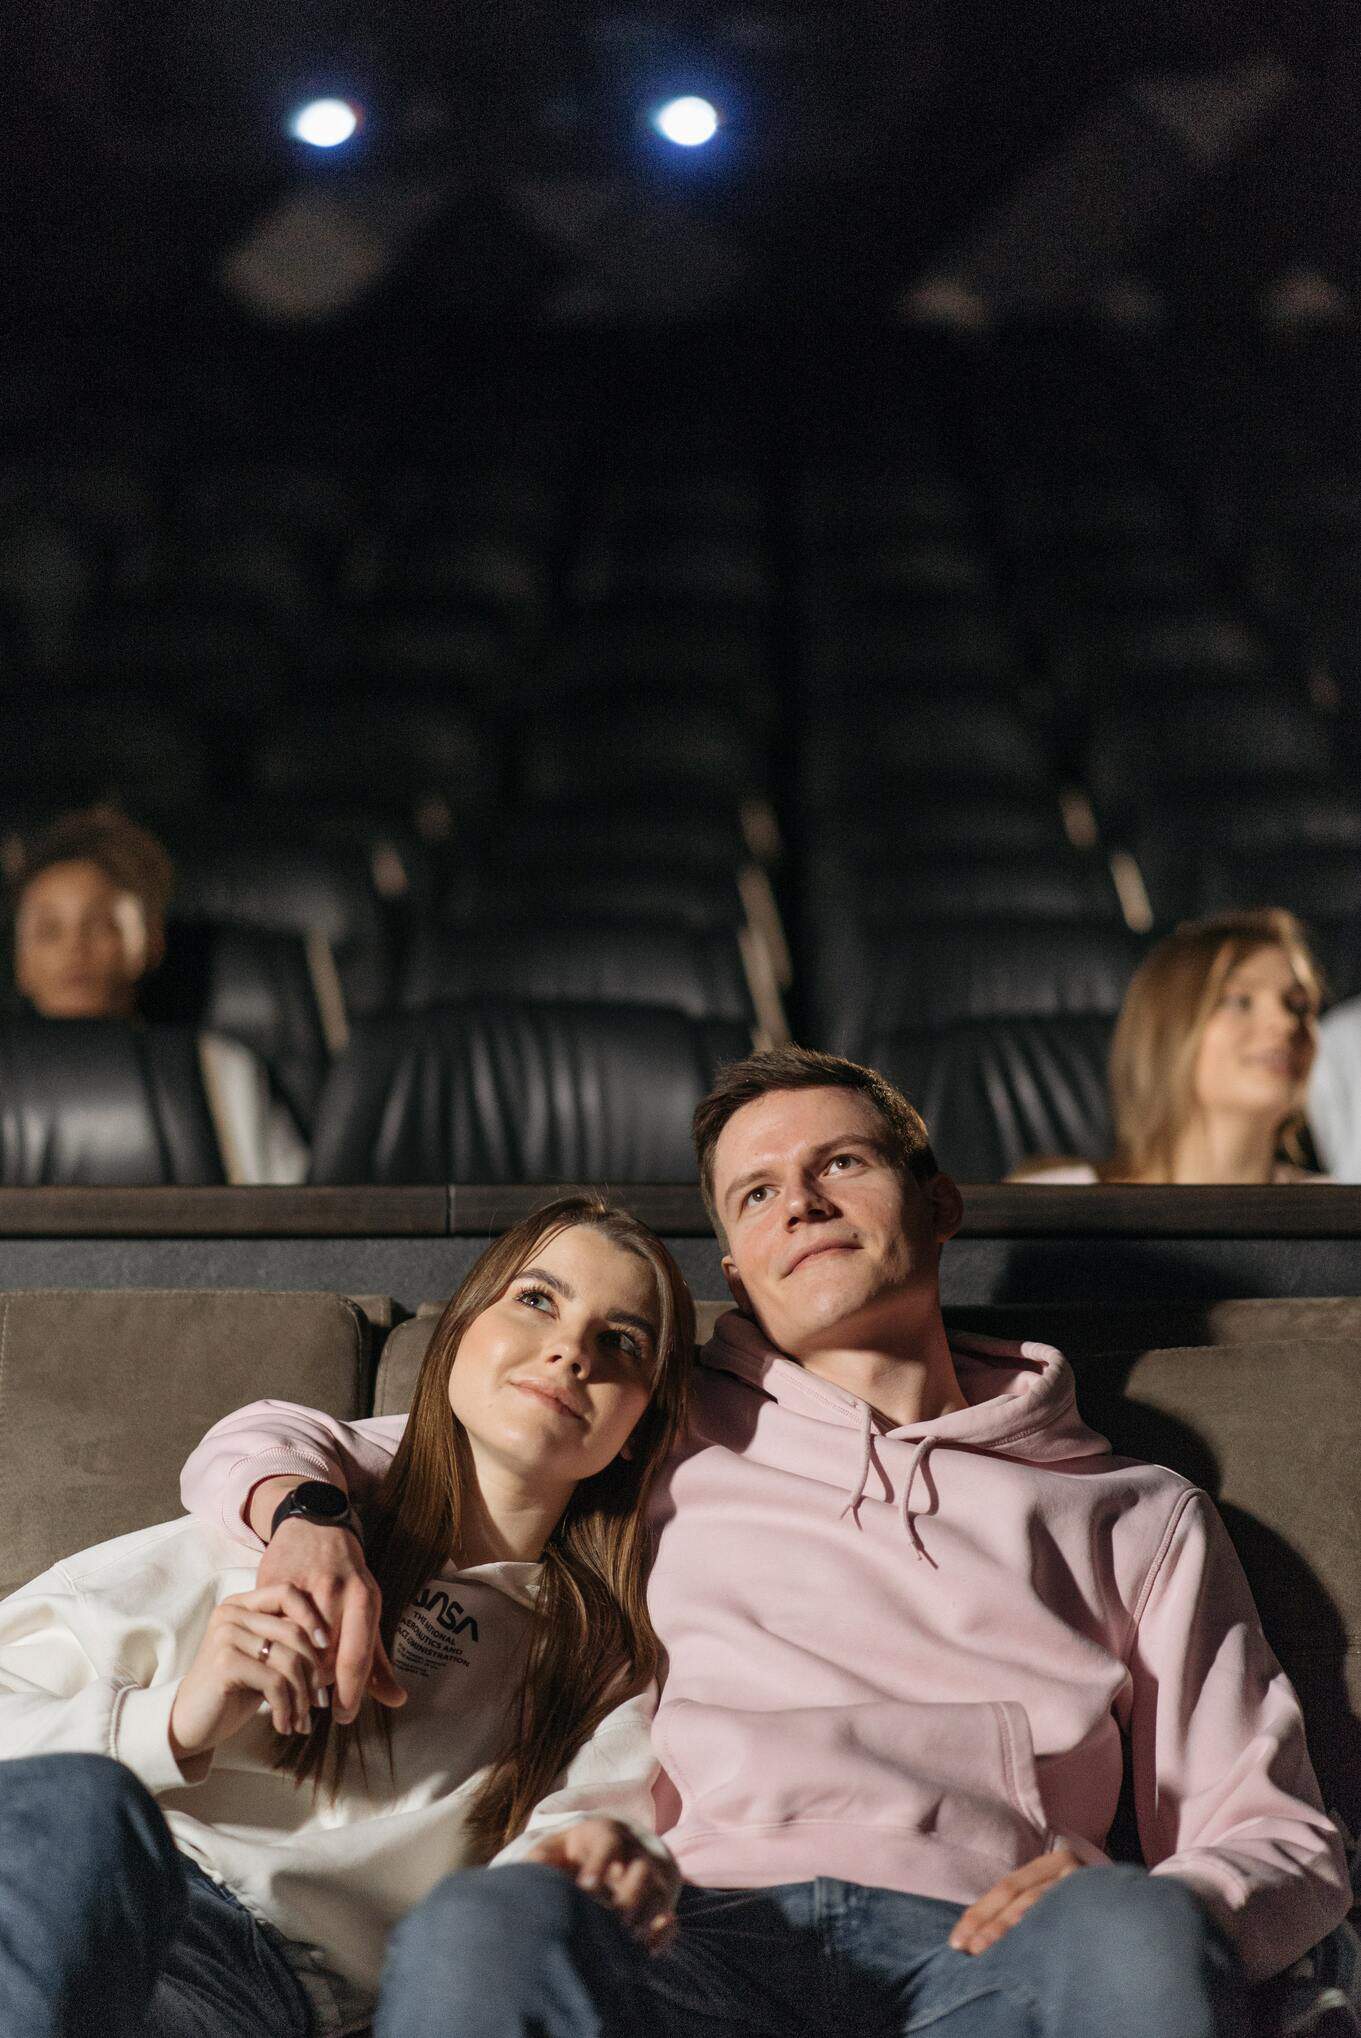 man embracing woman while watching movie in a theater